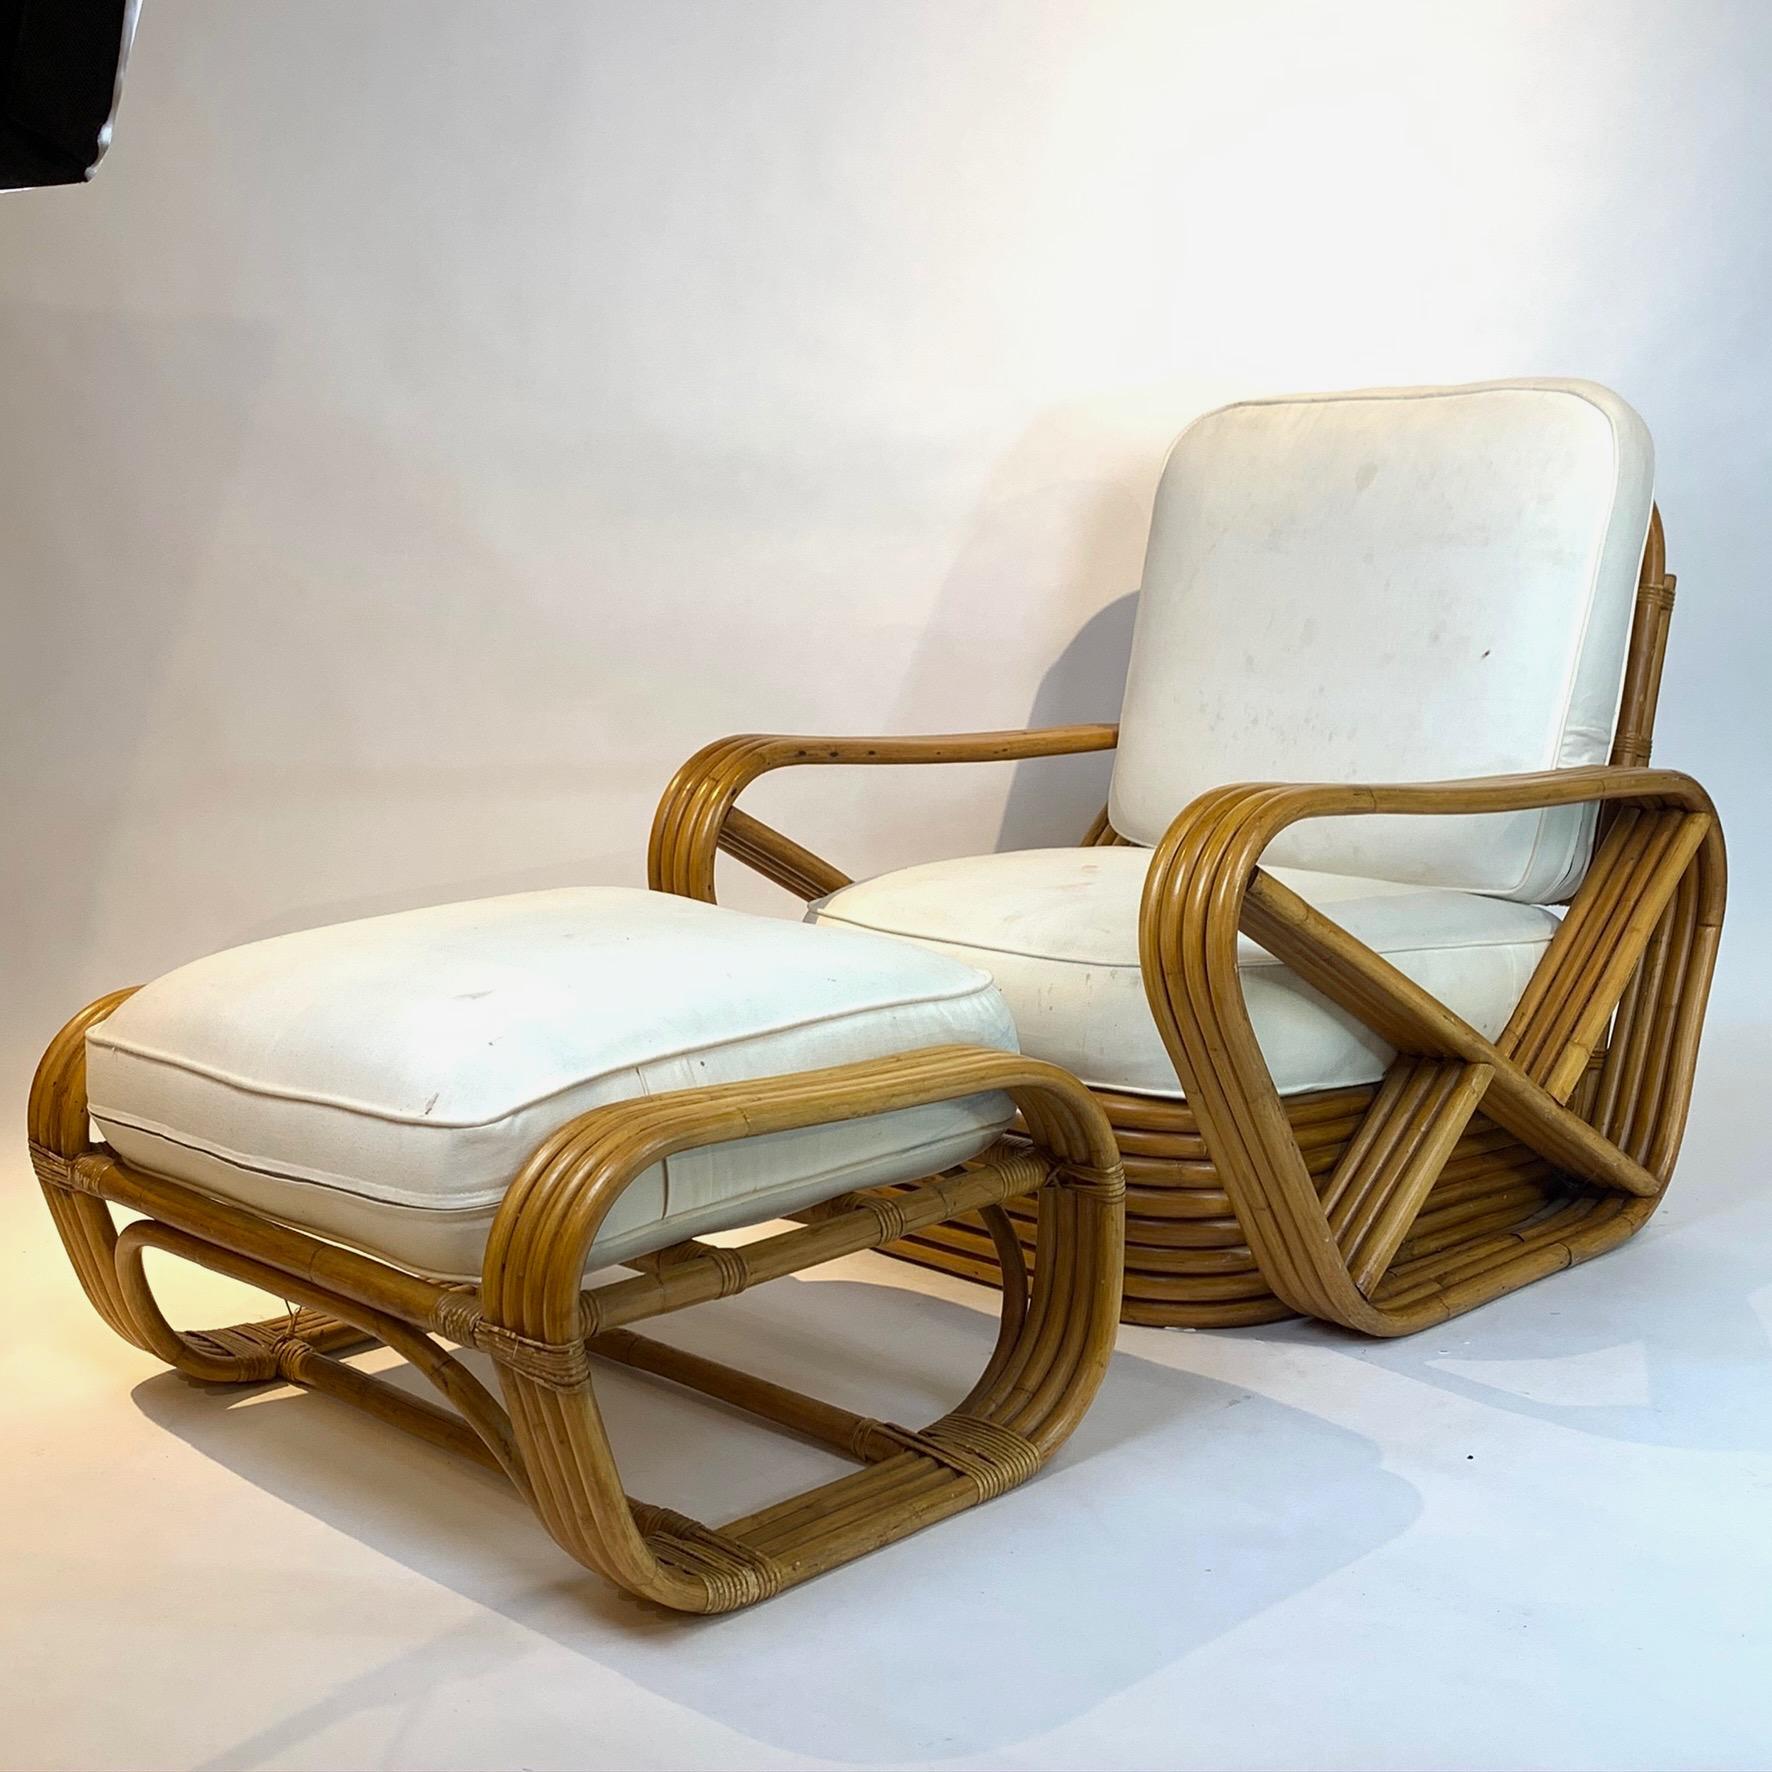 Japanese Pair of Rattan 1940s Paul Frankl Style Pretzel Chairs with Ottoman from Japan